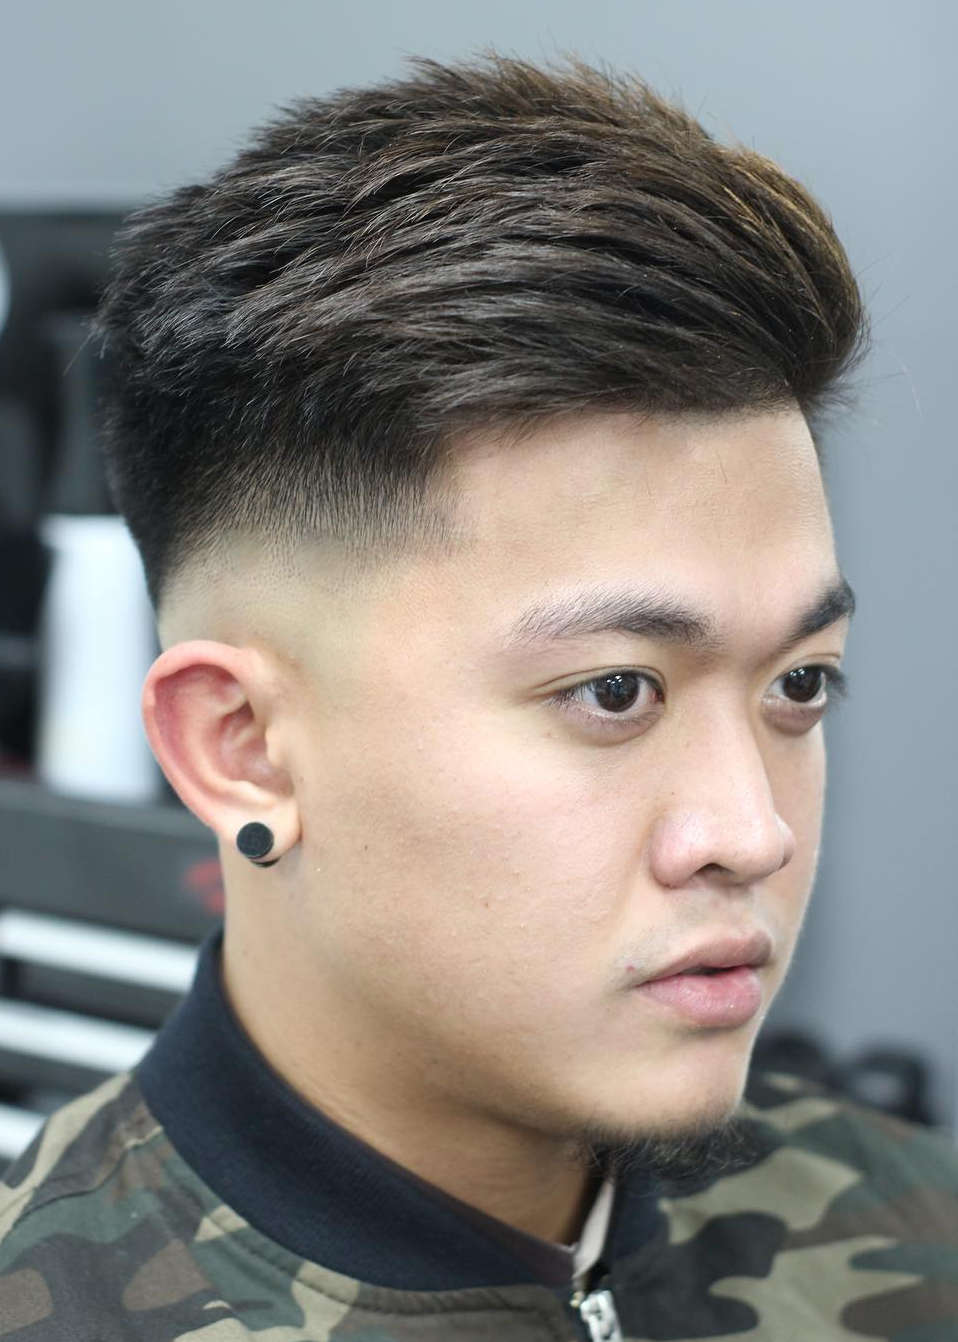 25 Asian Men Hairstyles- Style Up with the Avid Variety of Hairstyles